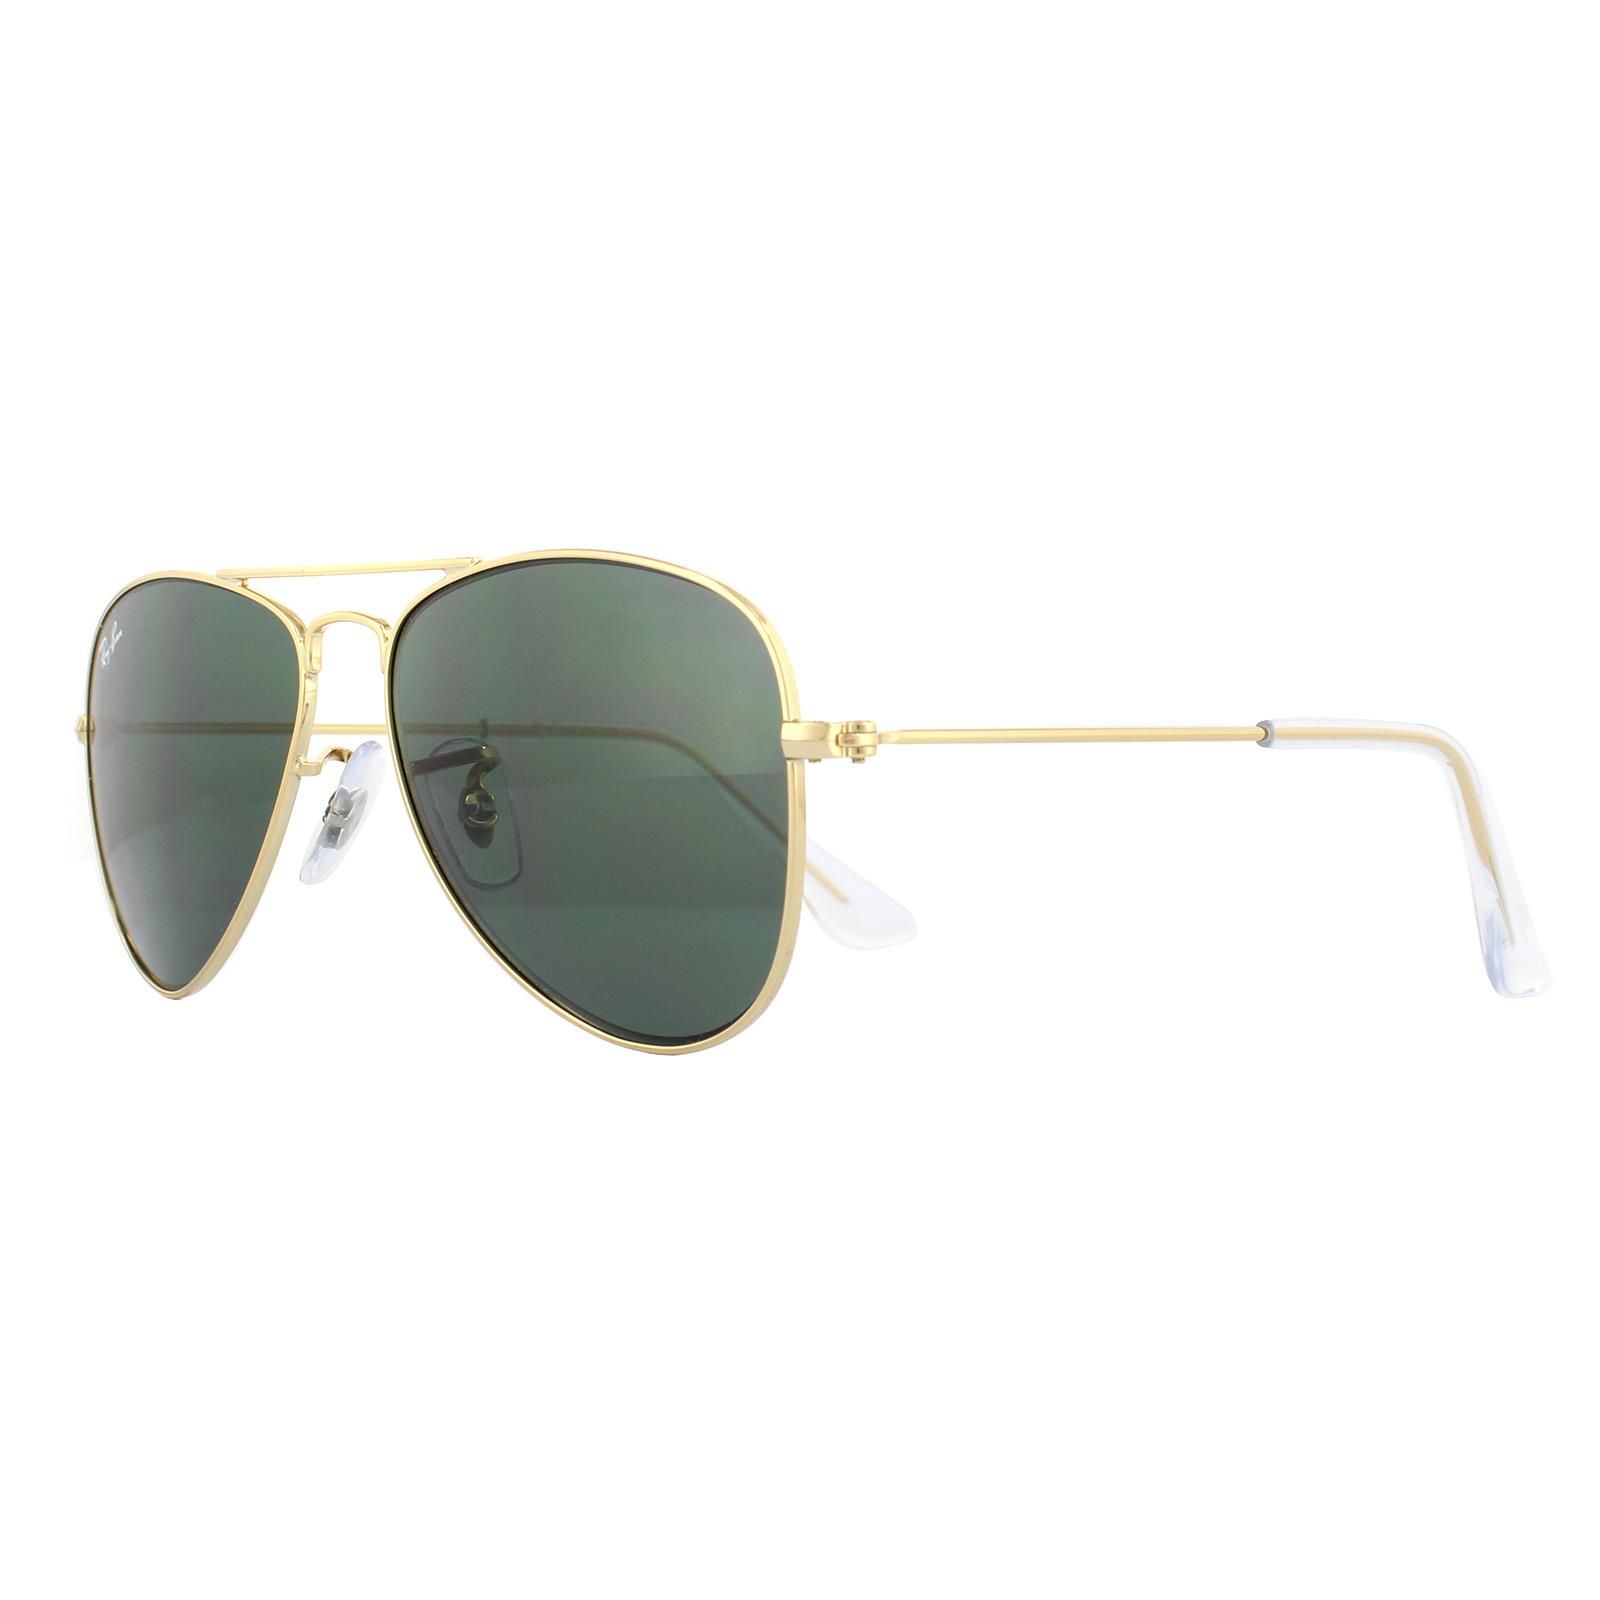 Ray-Ban Junior Sunglasses 9506 223/71 Gold Green are the kids version of the classic Ray-Ban aviator which offers great eye protection and also style for your hip youngster. This is the best selling sunglass in the world with reduced dimensions for kids.